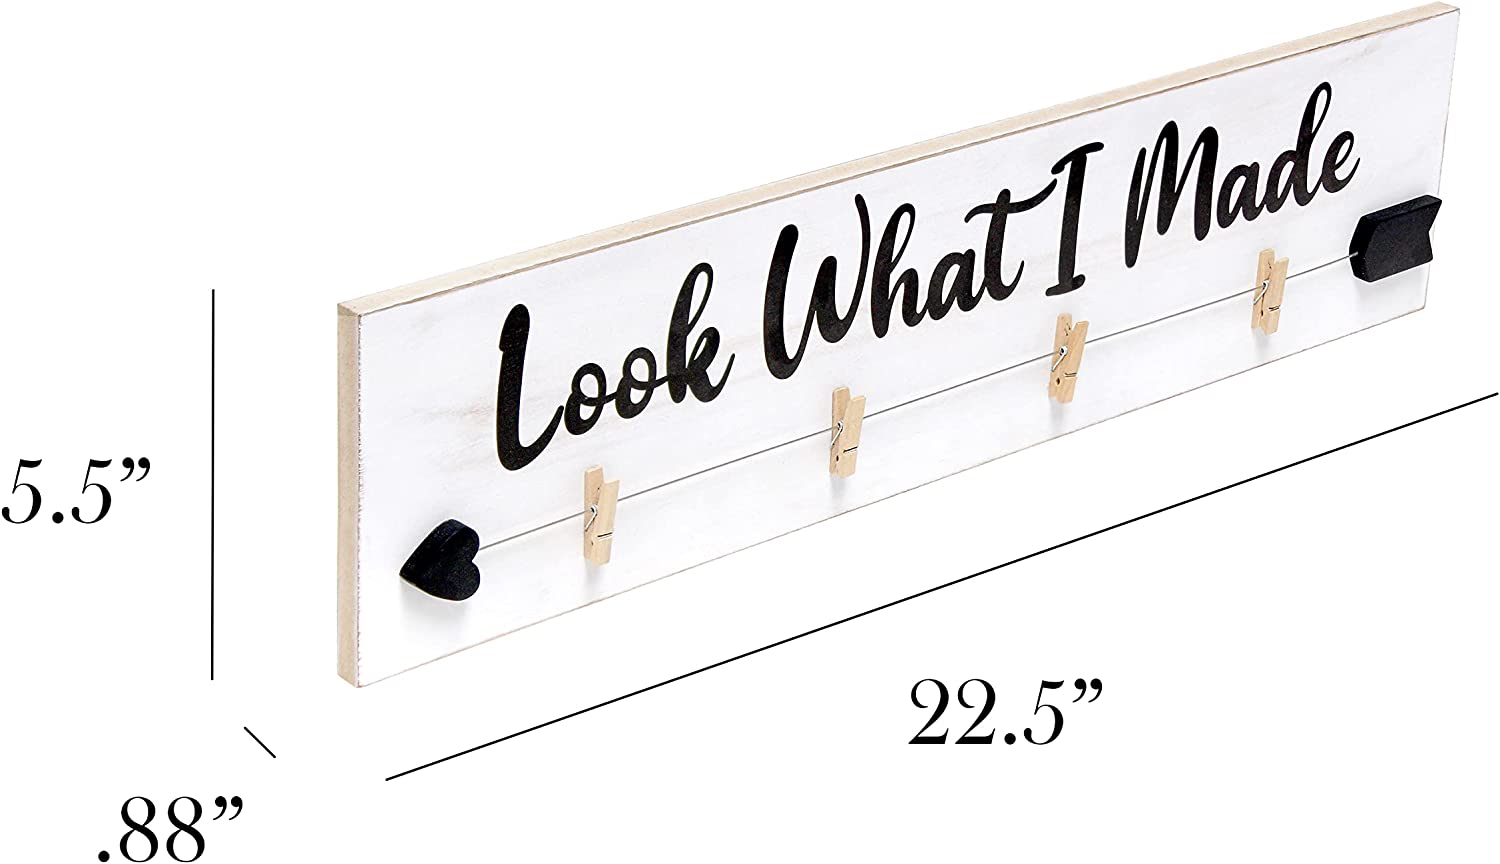 Elegant Designs HG2038-WBM Decorix Farmhouse Wall Mounted Hanging 4 Photo Wood Picture Display w Clips & Look What I Made Black Script for Artwork,Drawings,Décor,Kids Room,Nursery,Playroom,Wht Wash